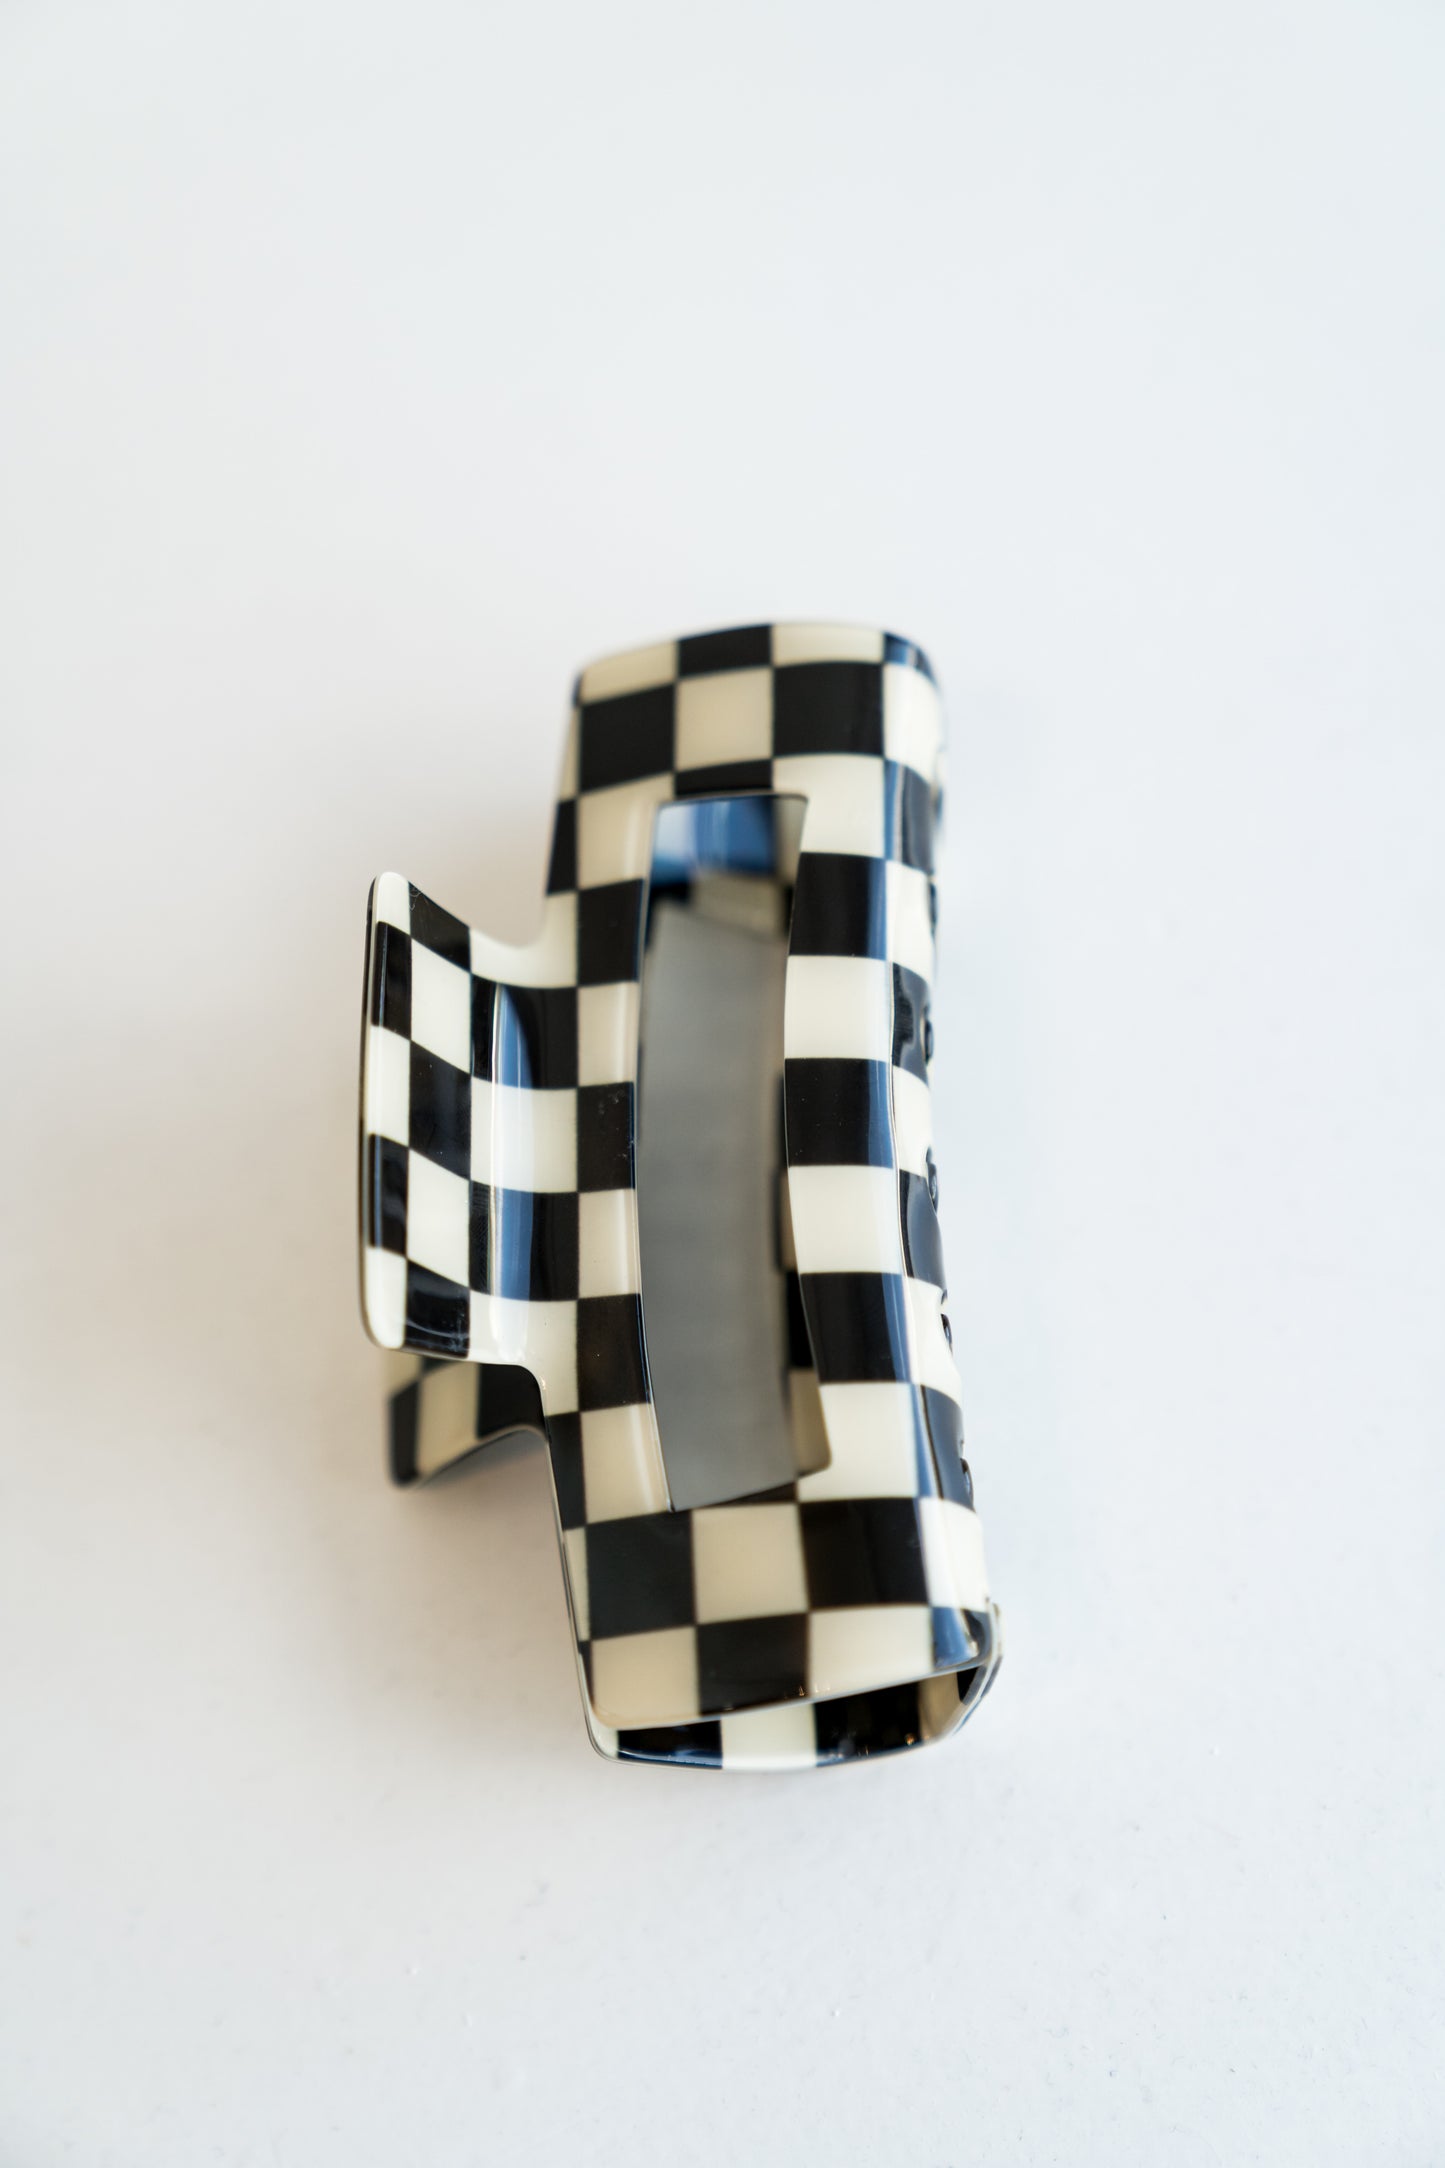 Checkered Claw Clips